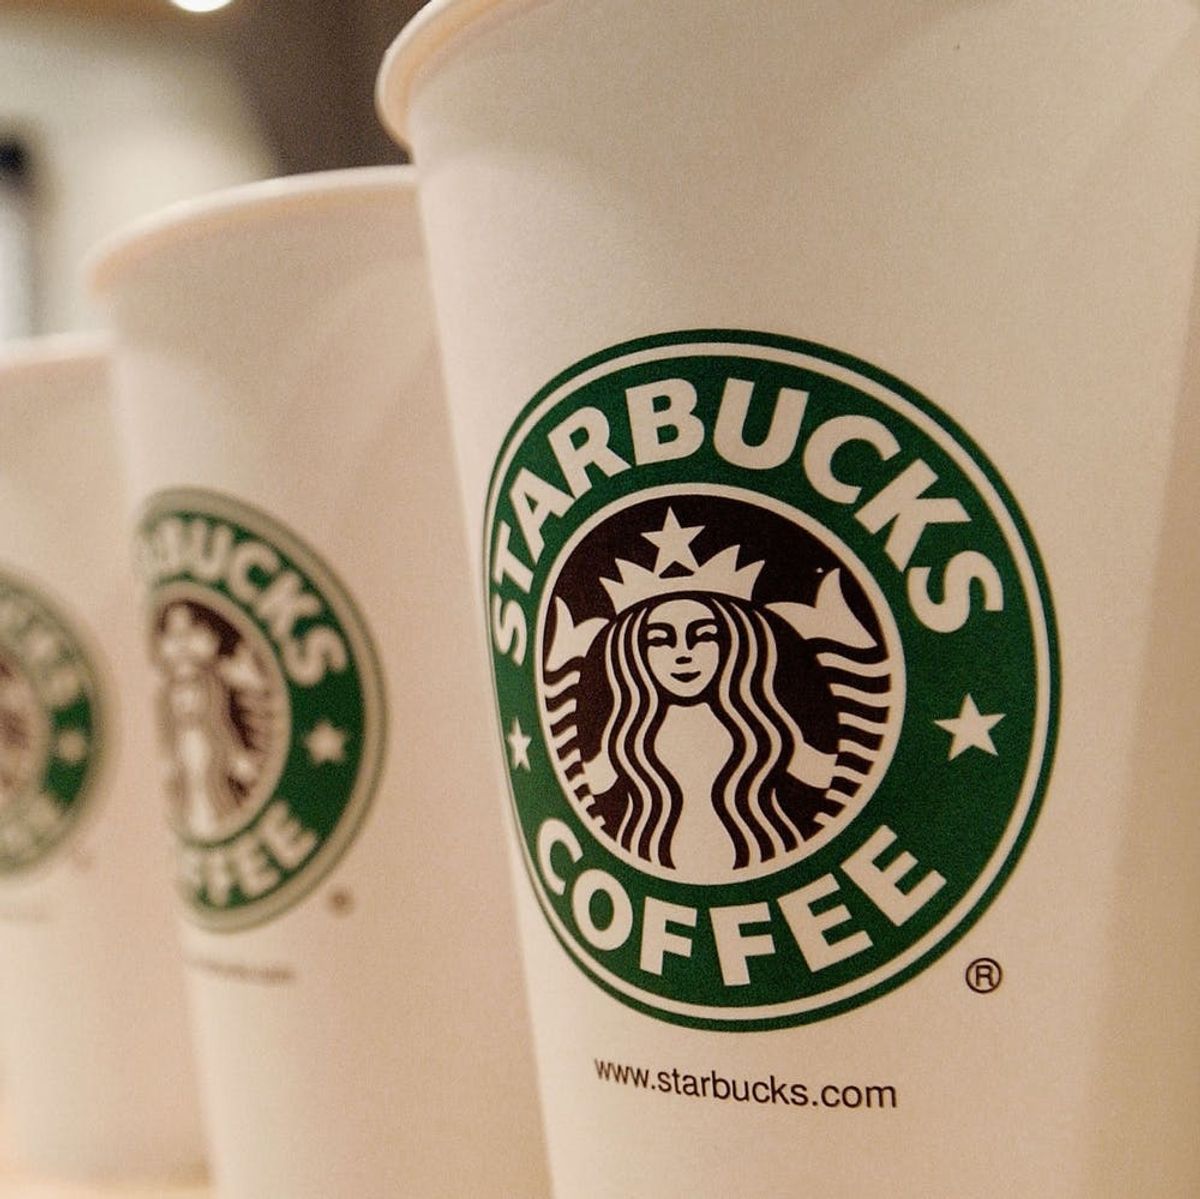 You’ll Never Guess Starbucks’ Newest Frappuccino Flavor